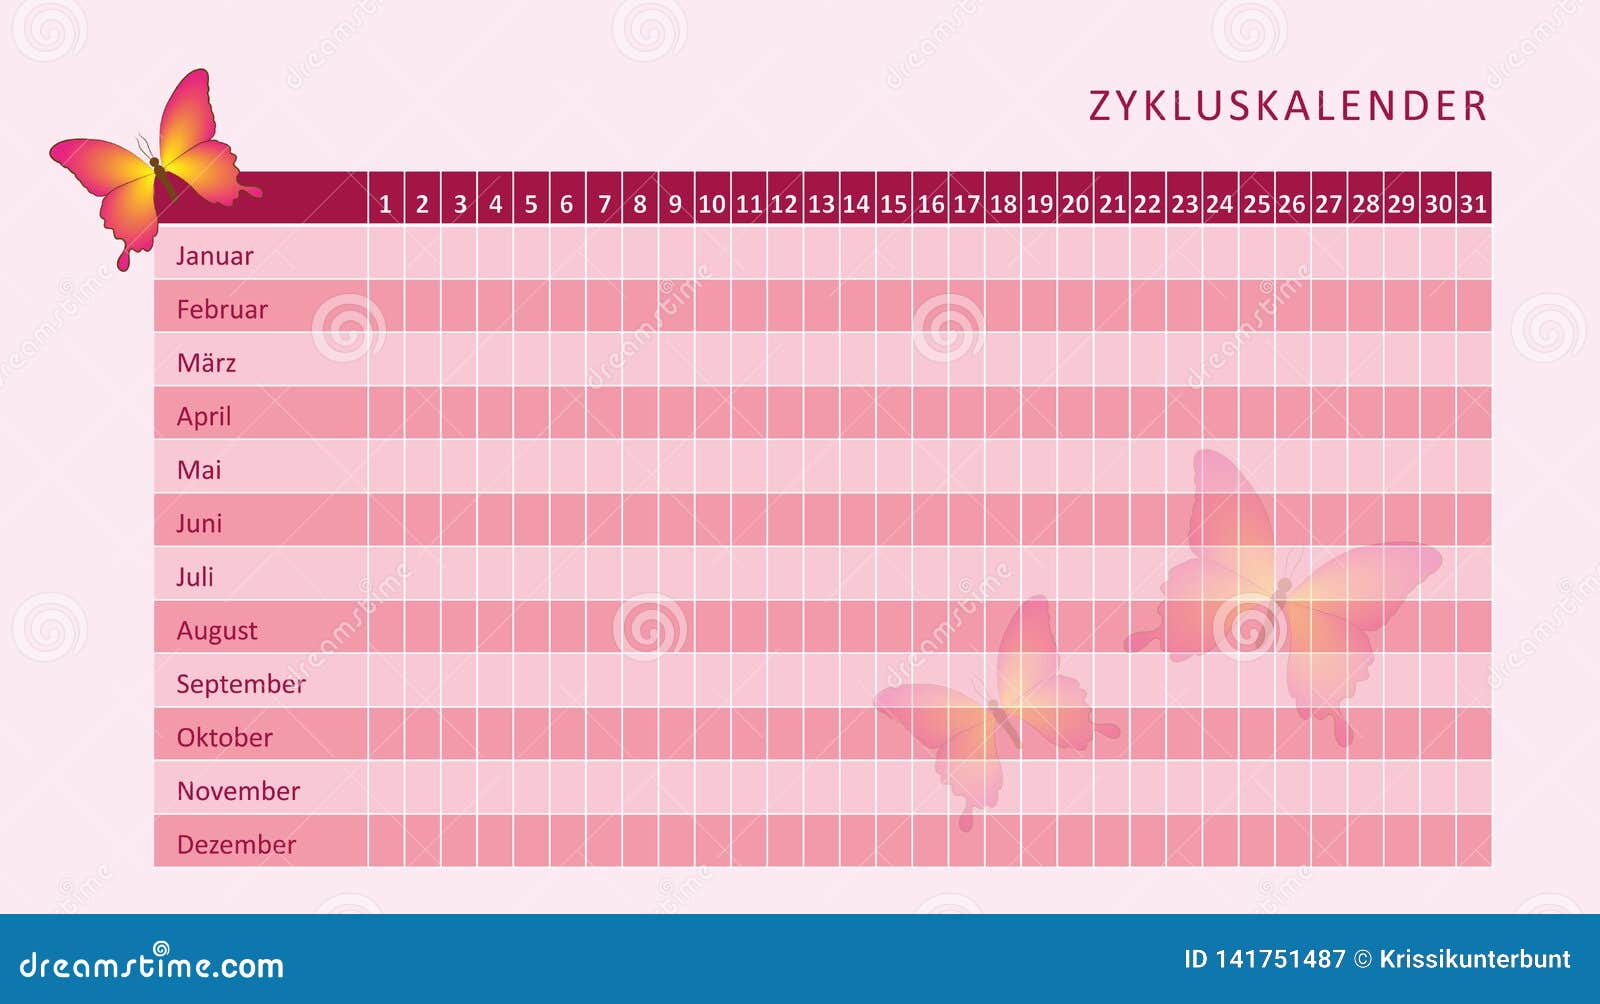 How To Chart Your Menstrual Cycle